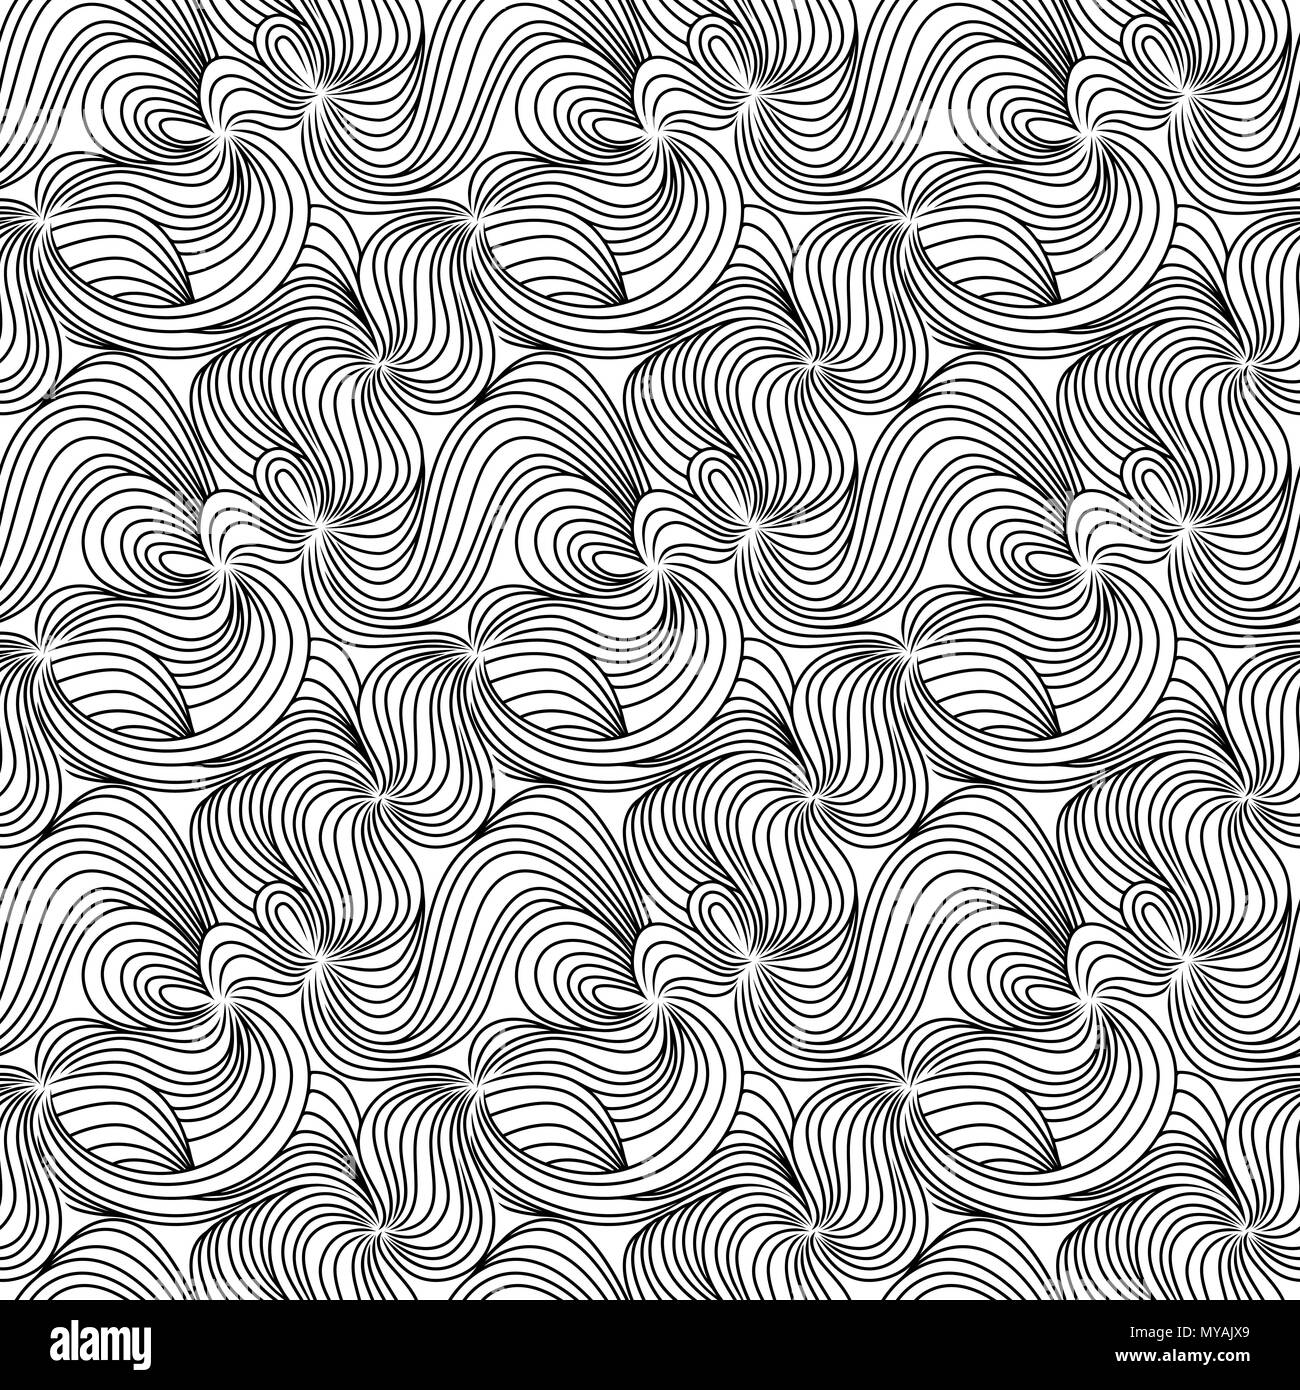 Monochrome seamless vector pattern made with interwoven wavy lines and curves in as a fabric texture Stock Vector